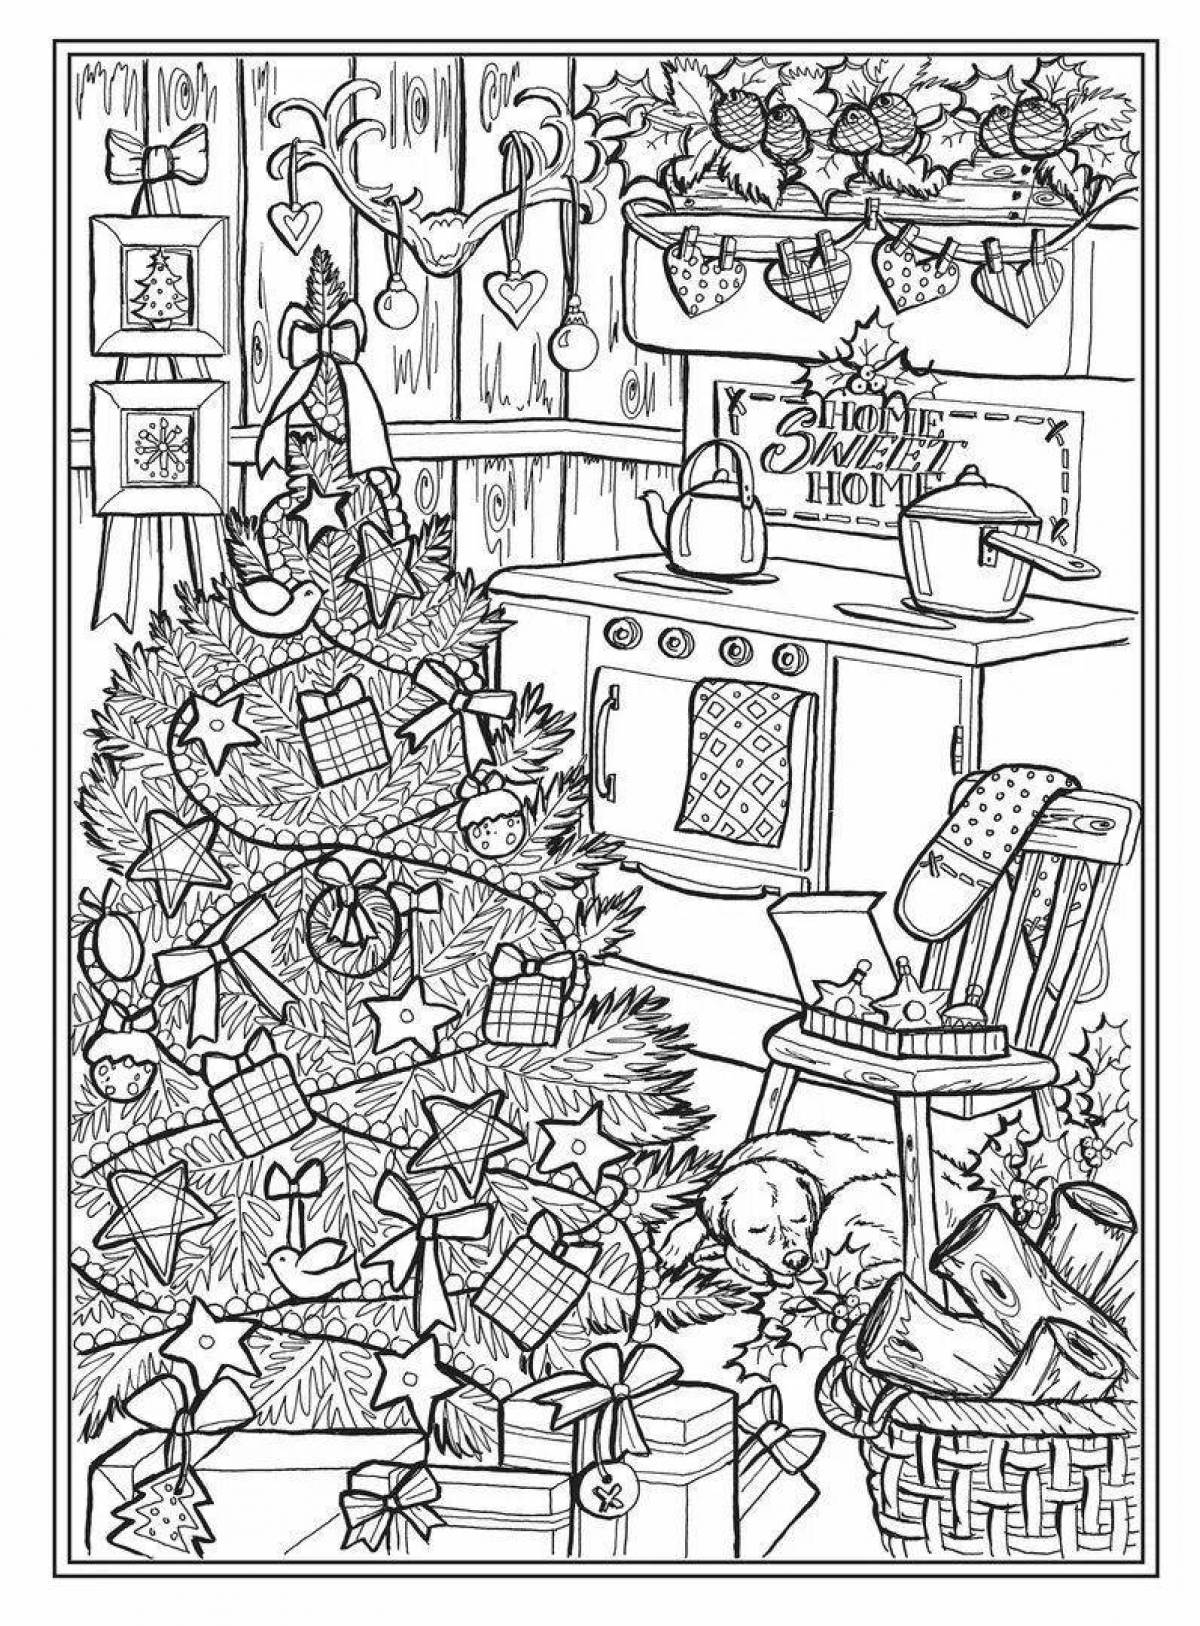 Coloring page creative haven - exquisite